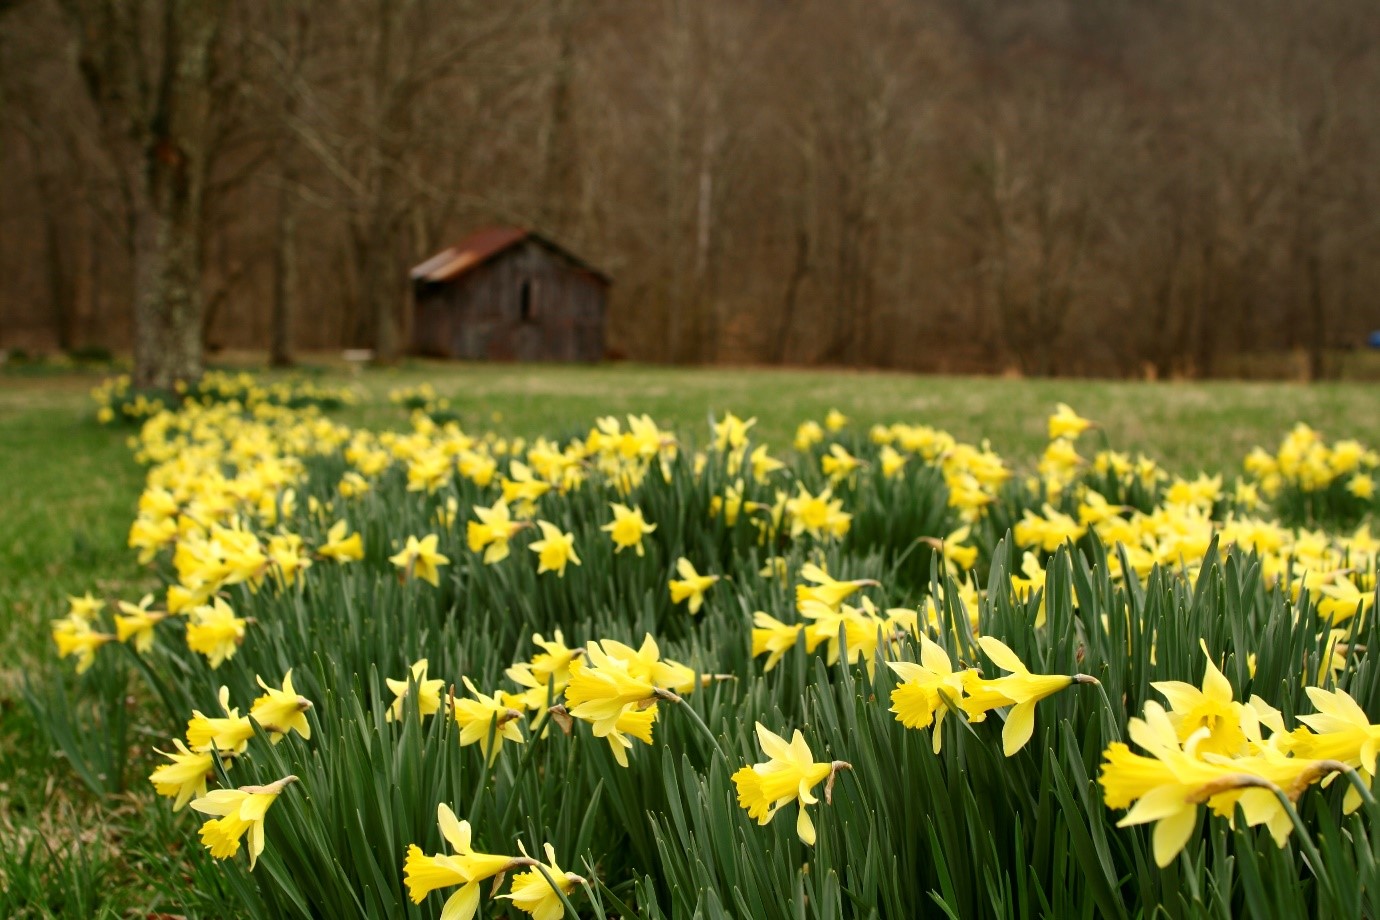 Field of daffodils in March